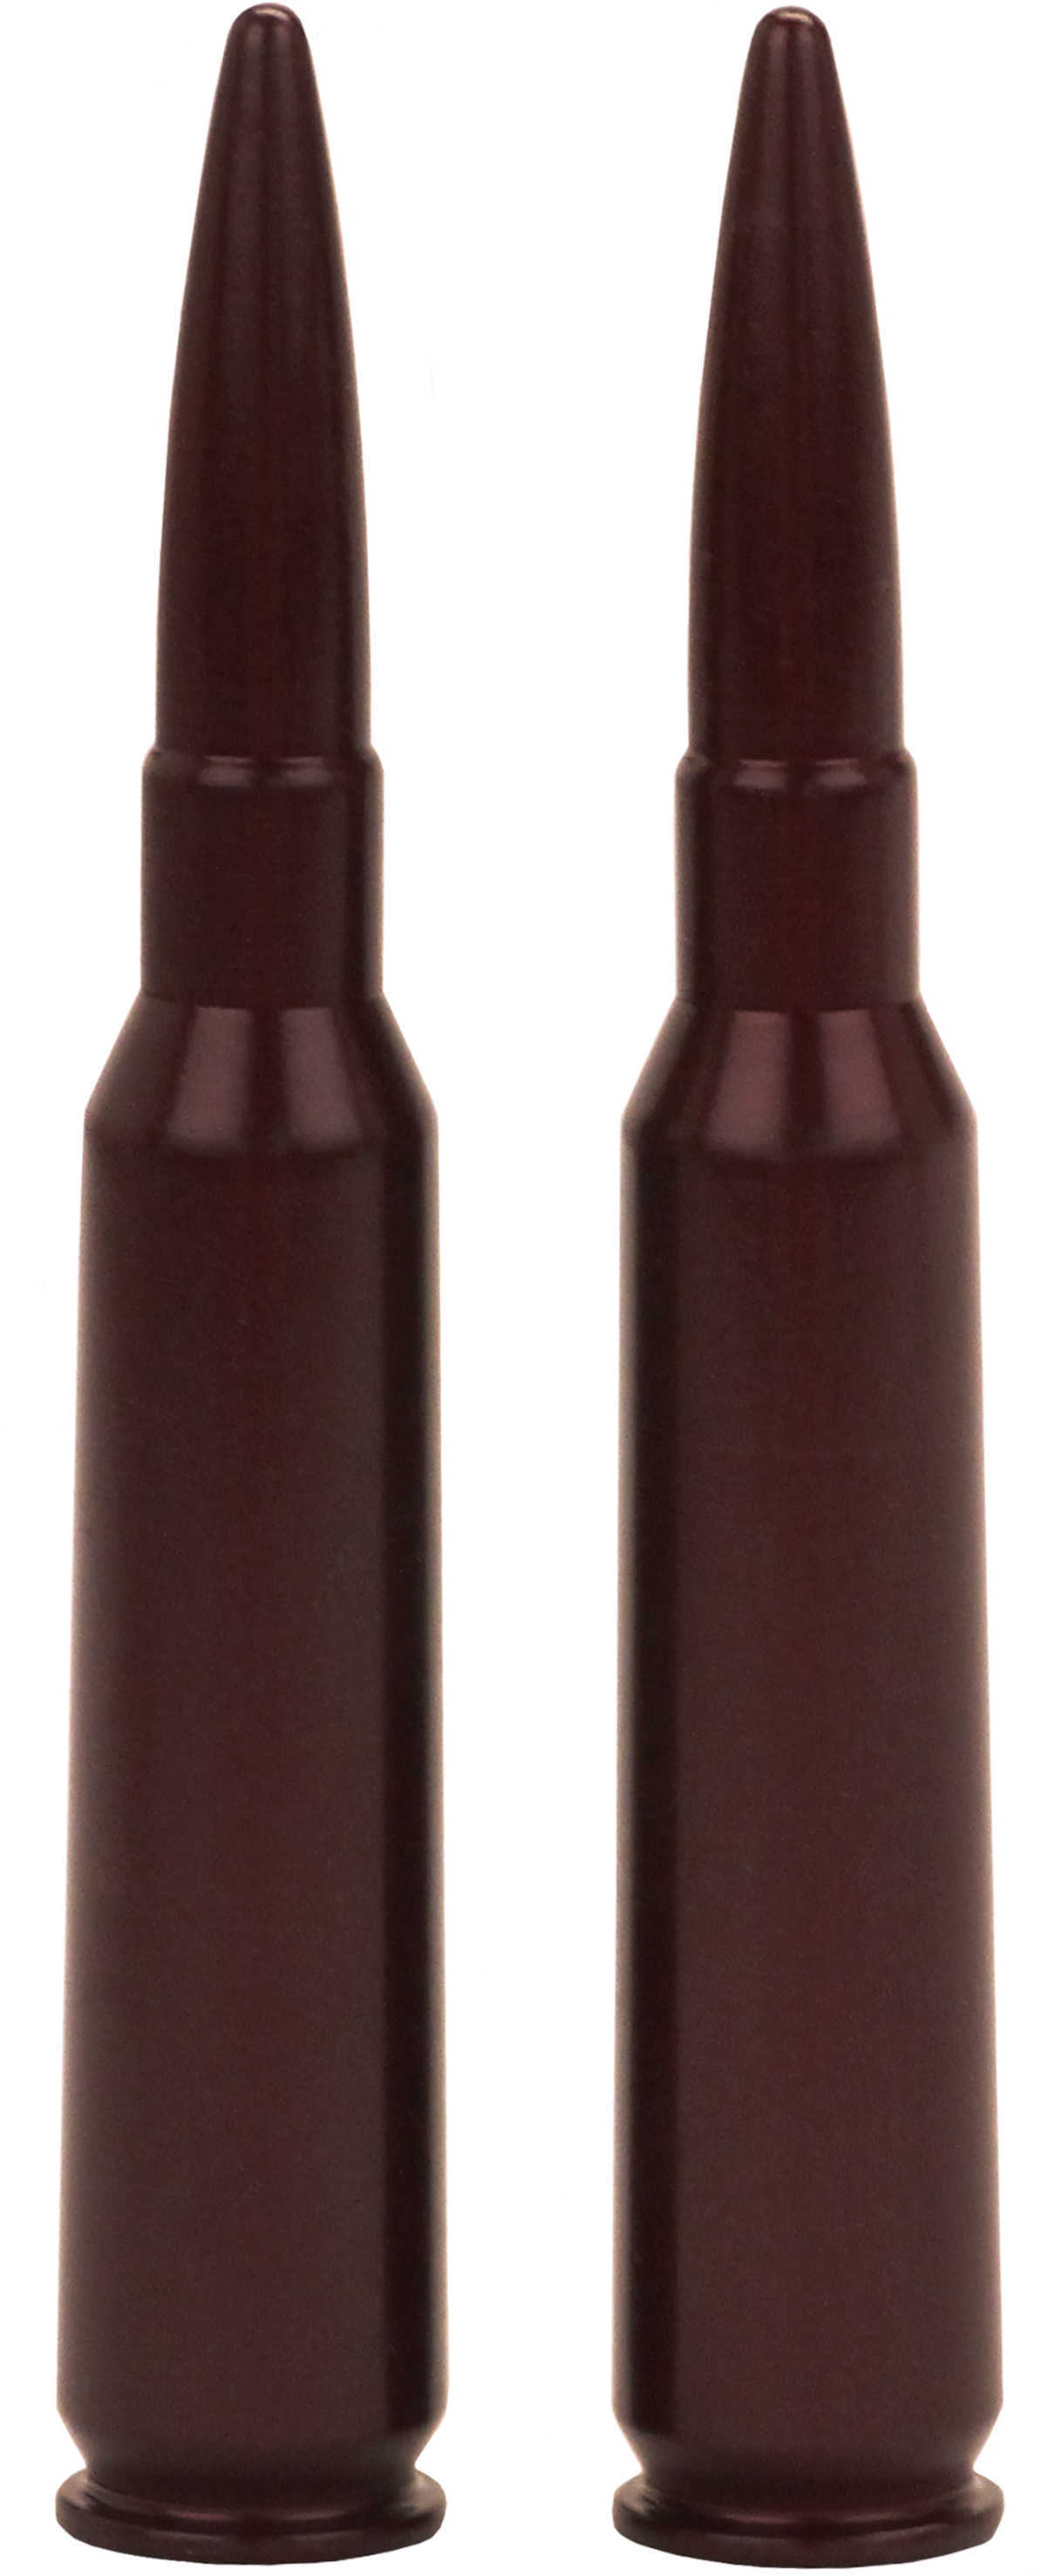 A-Zoom Metal Snap Cap 6.5X55 Swedish Mauser 2-Pack